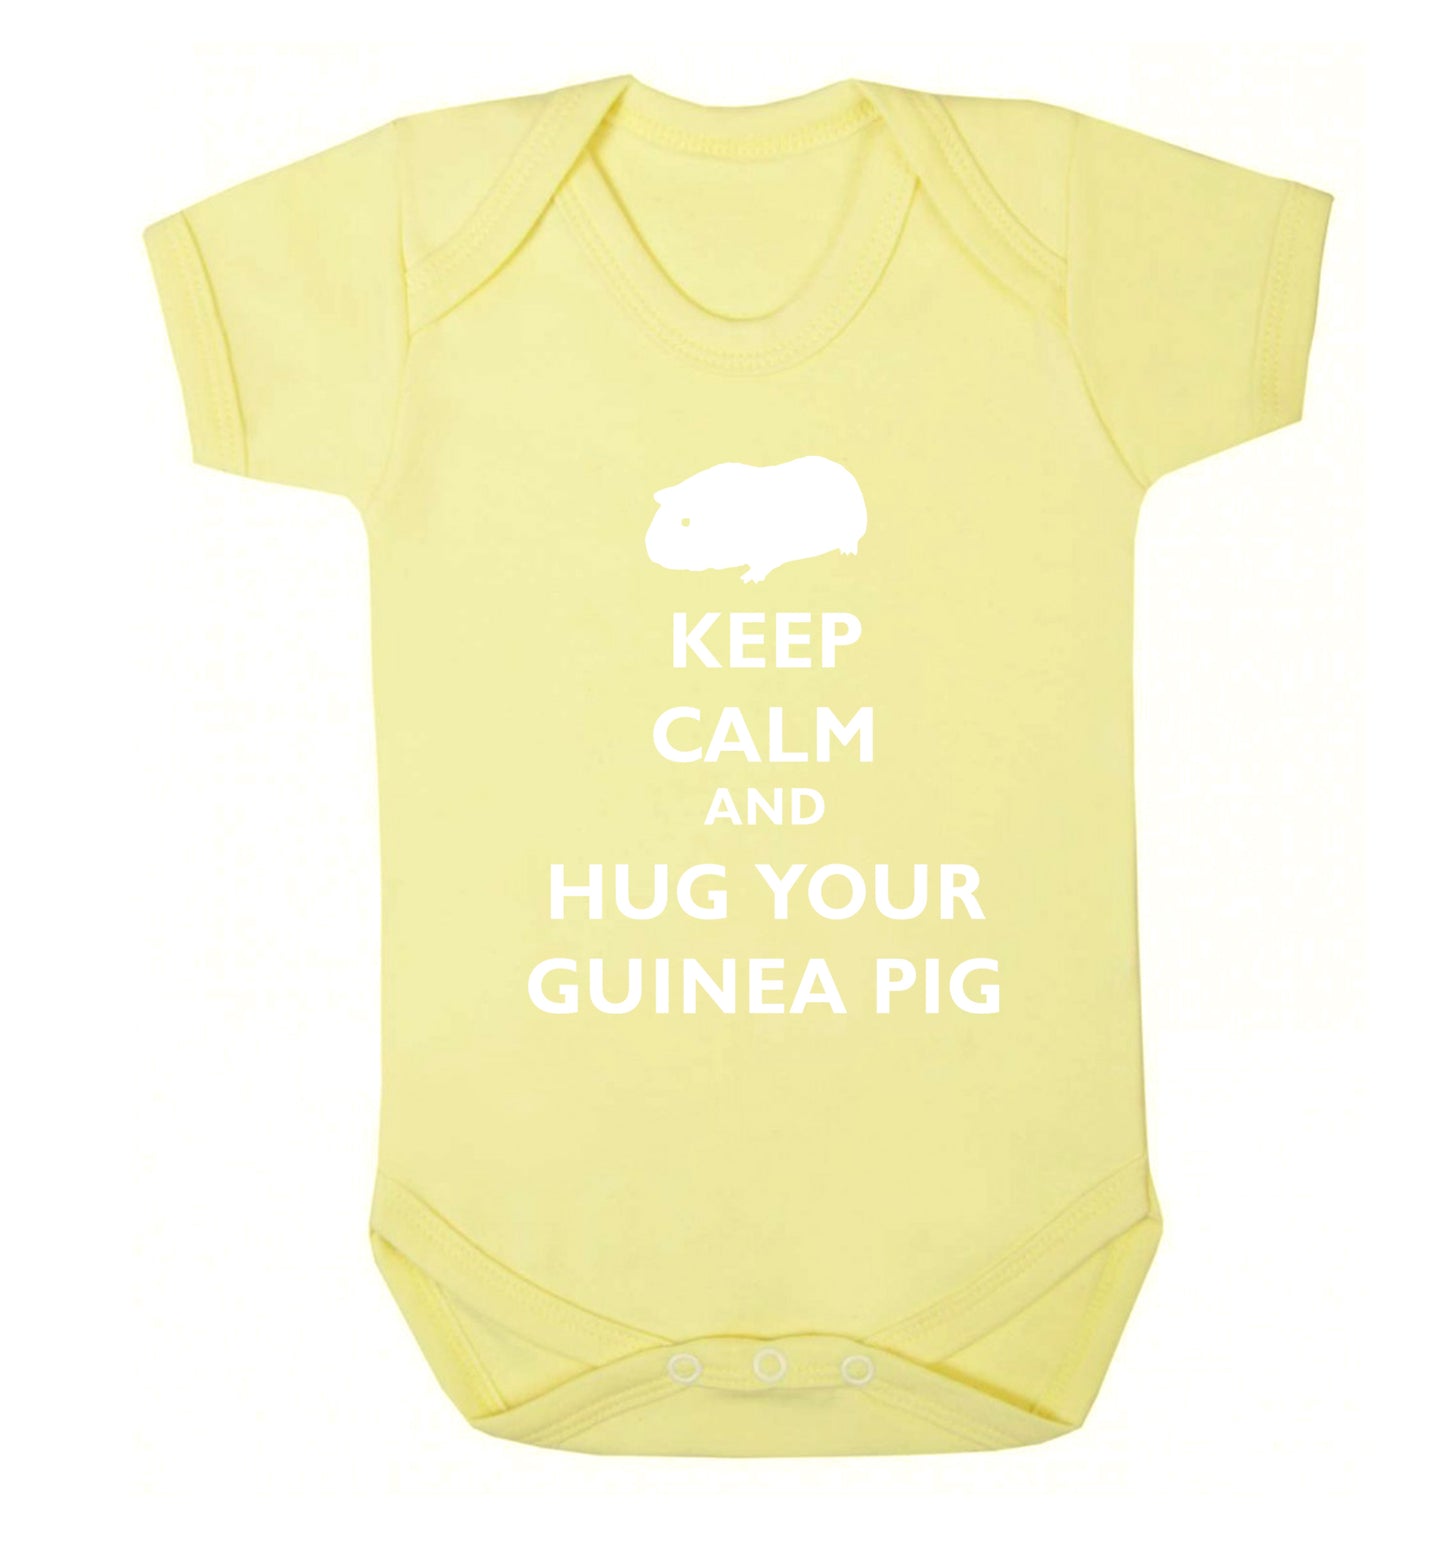 Keep calm and hug your guineapig Baby Vest pale yellow 18-24 months